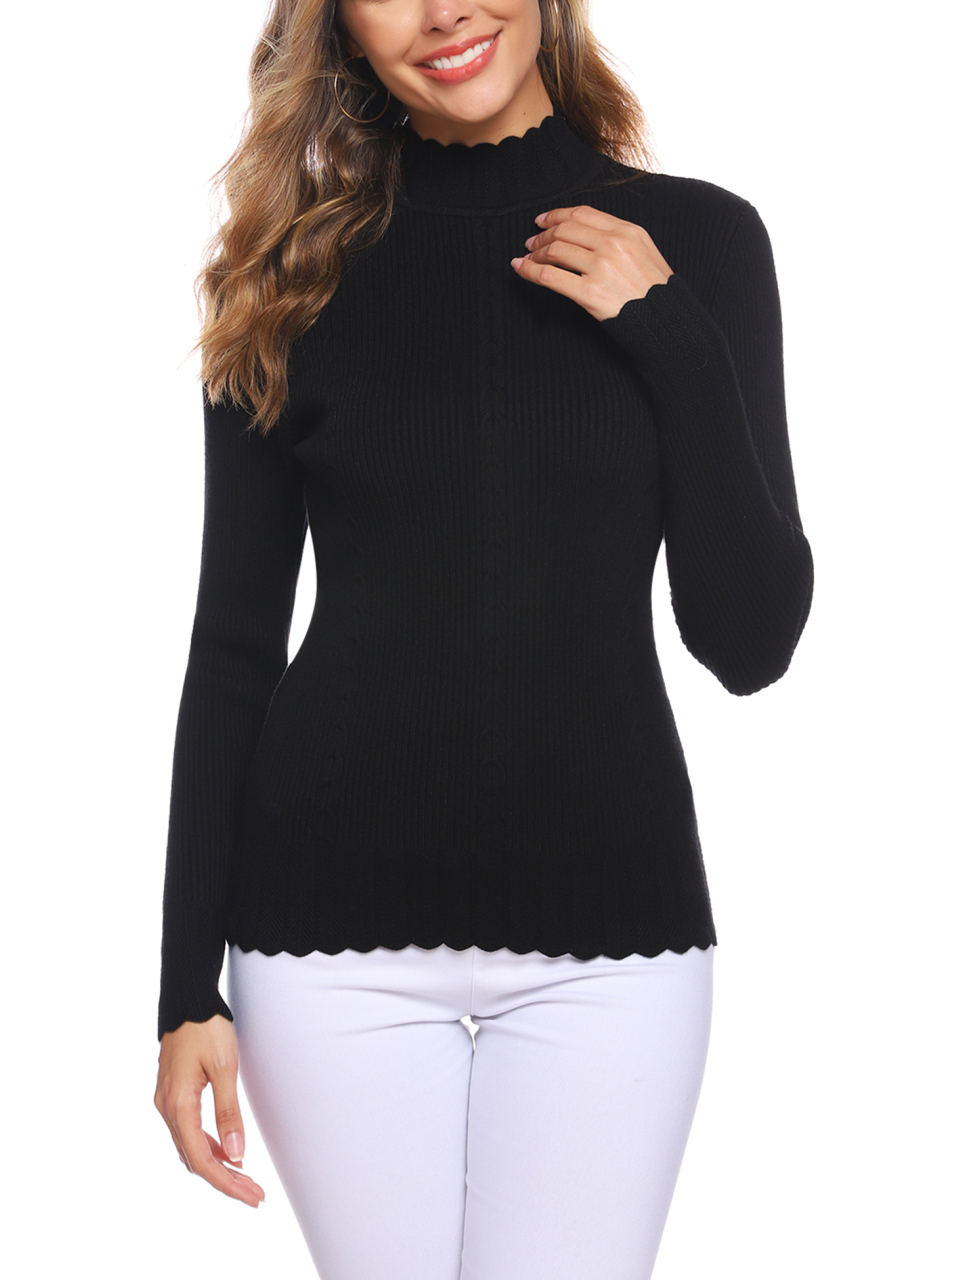 Women's Slim Fit Pullover Long Sleeve Sweater